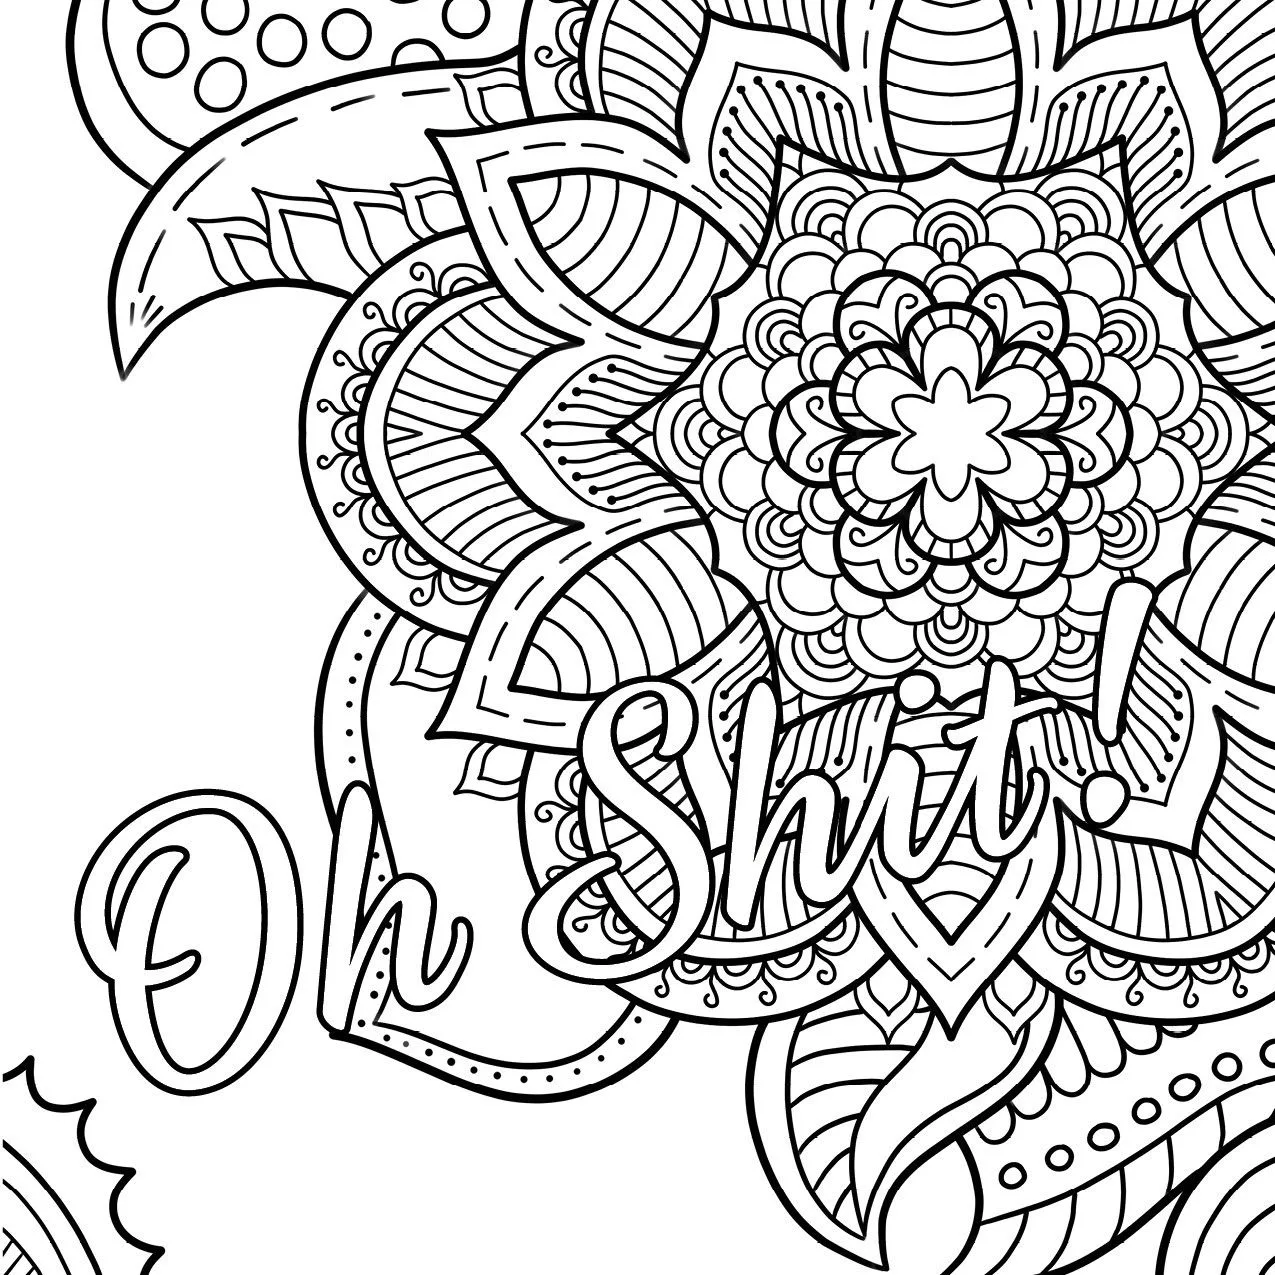 Pin on Free adult coloring pages